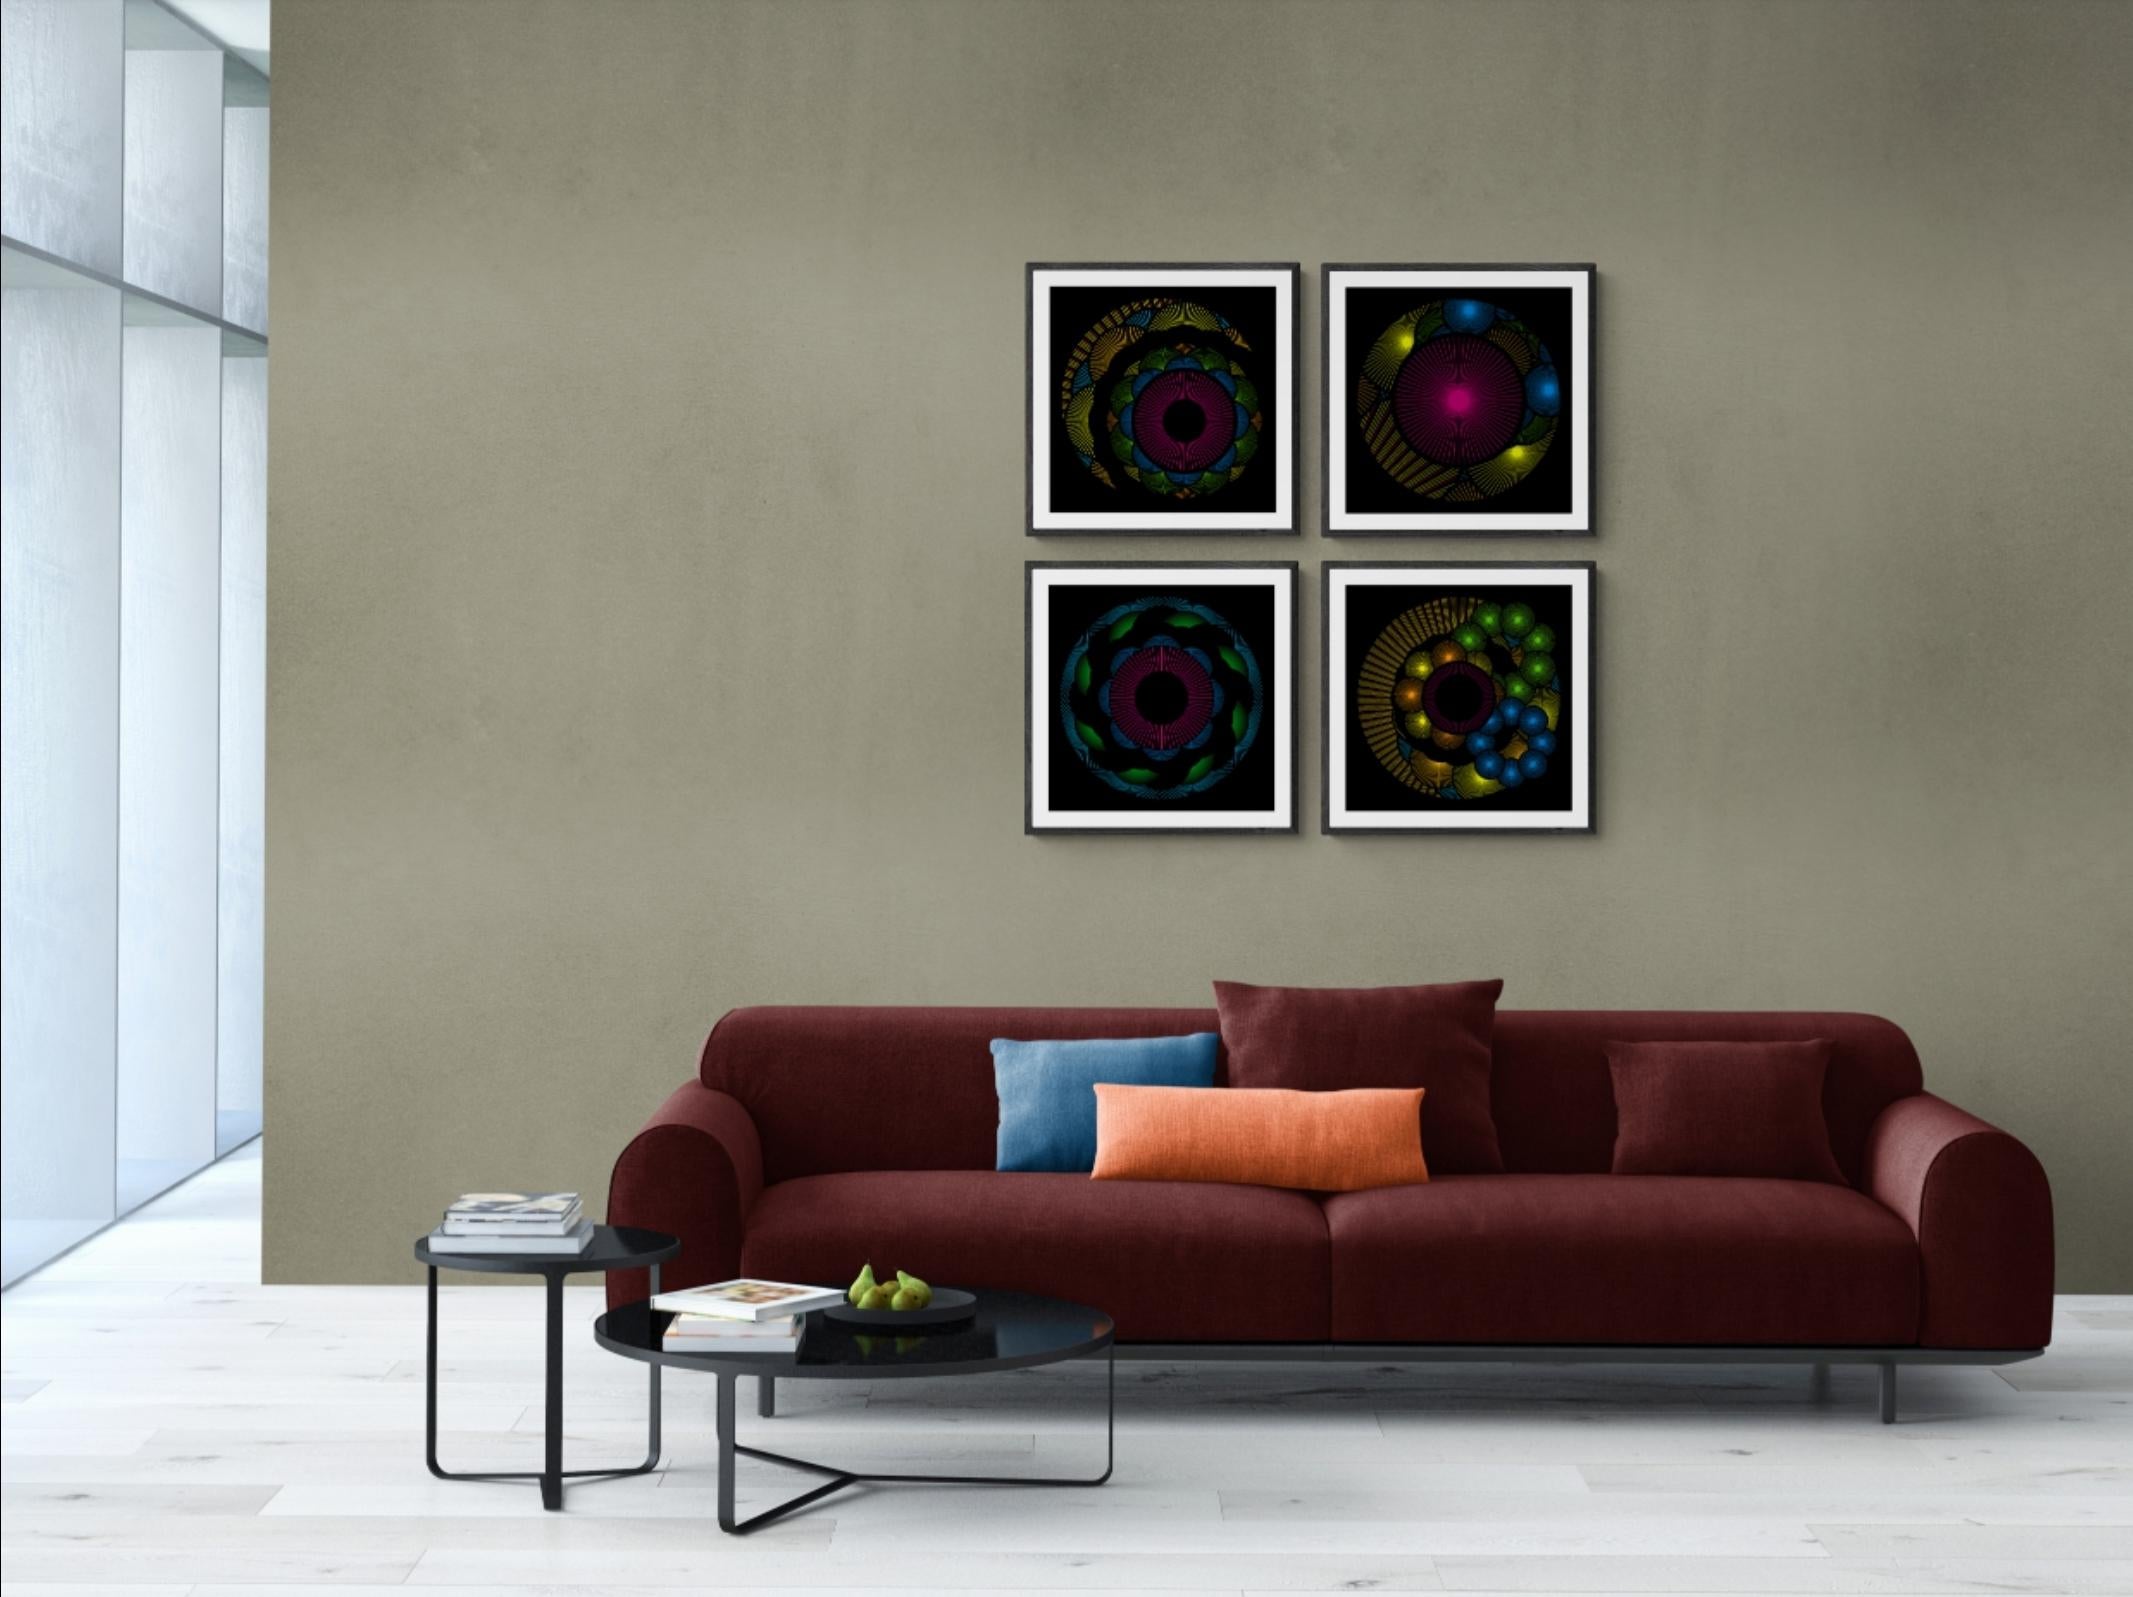 Nebulosa 7 - Black Abstract Print by Julio Campos